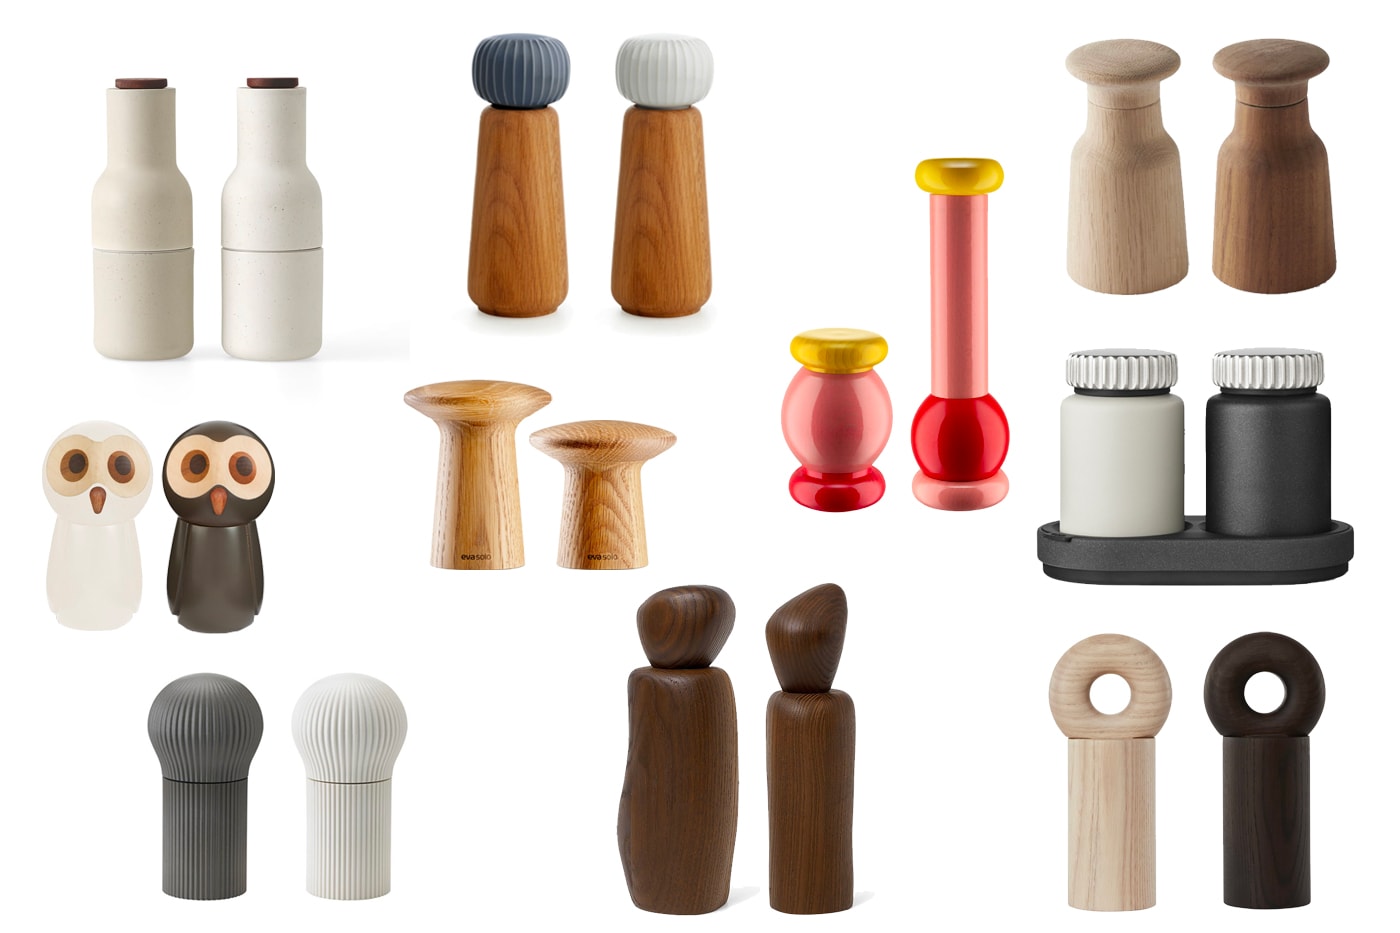 What are the ways to fill or refill a salt and pepper mill? - Quora